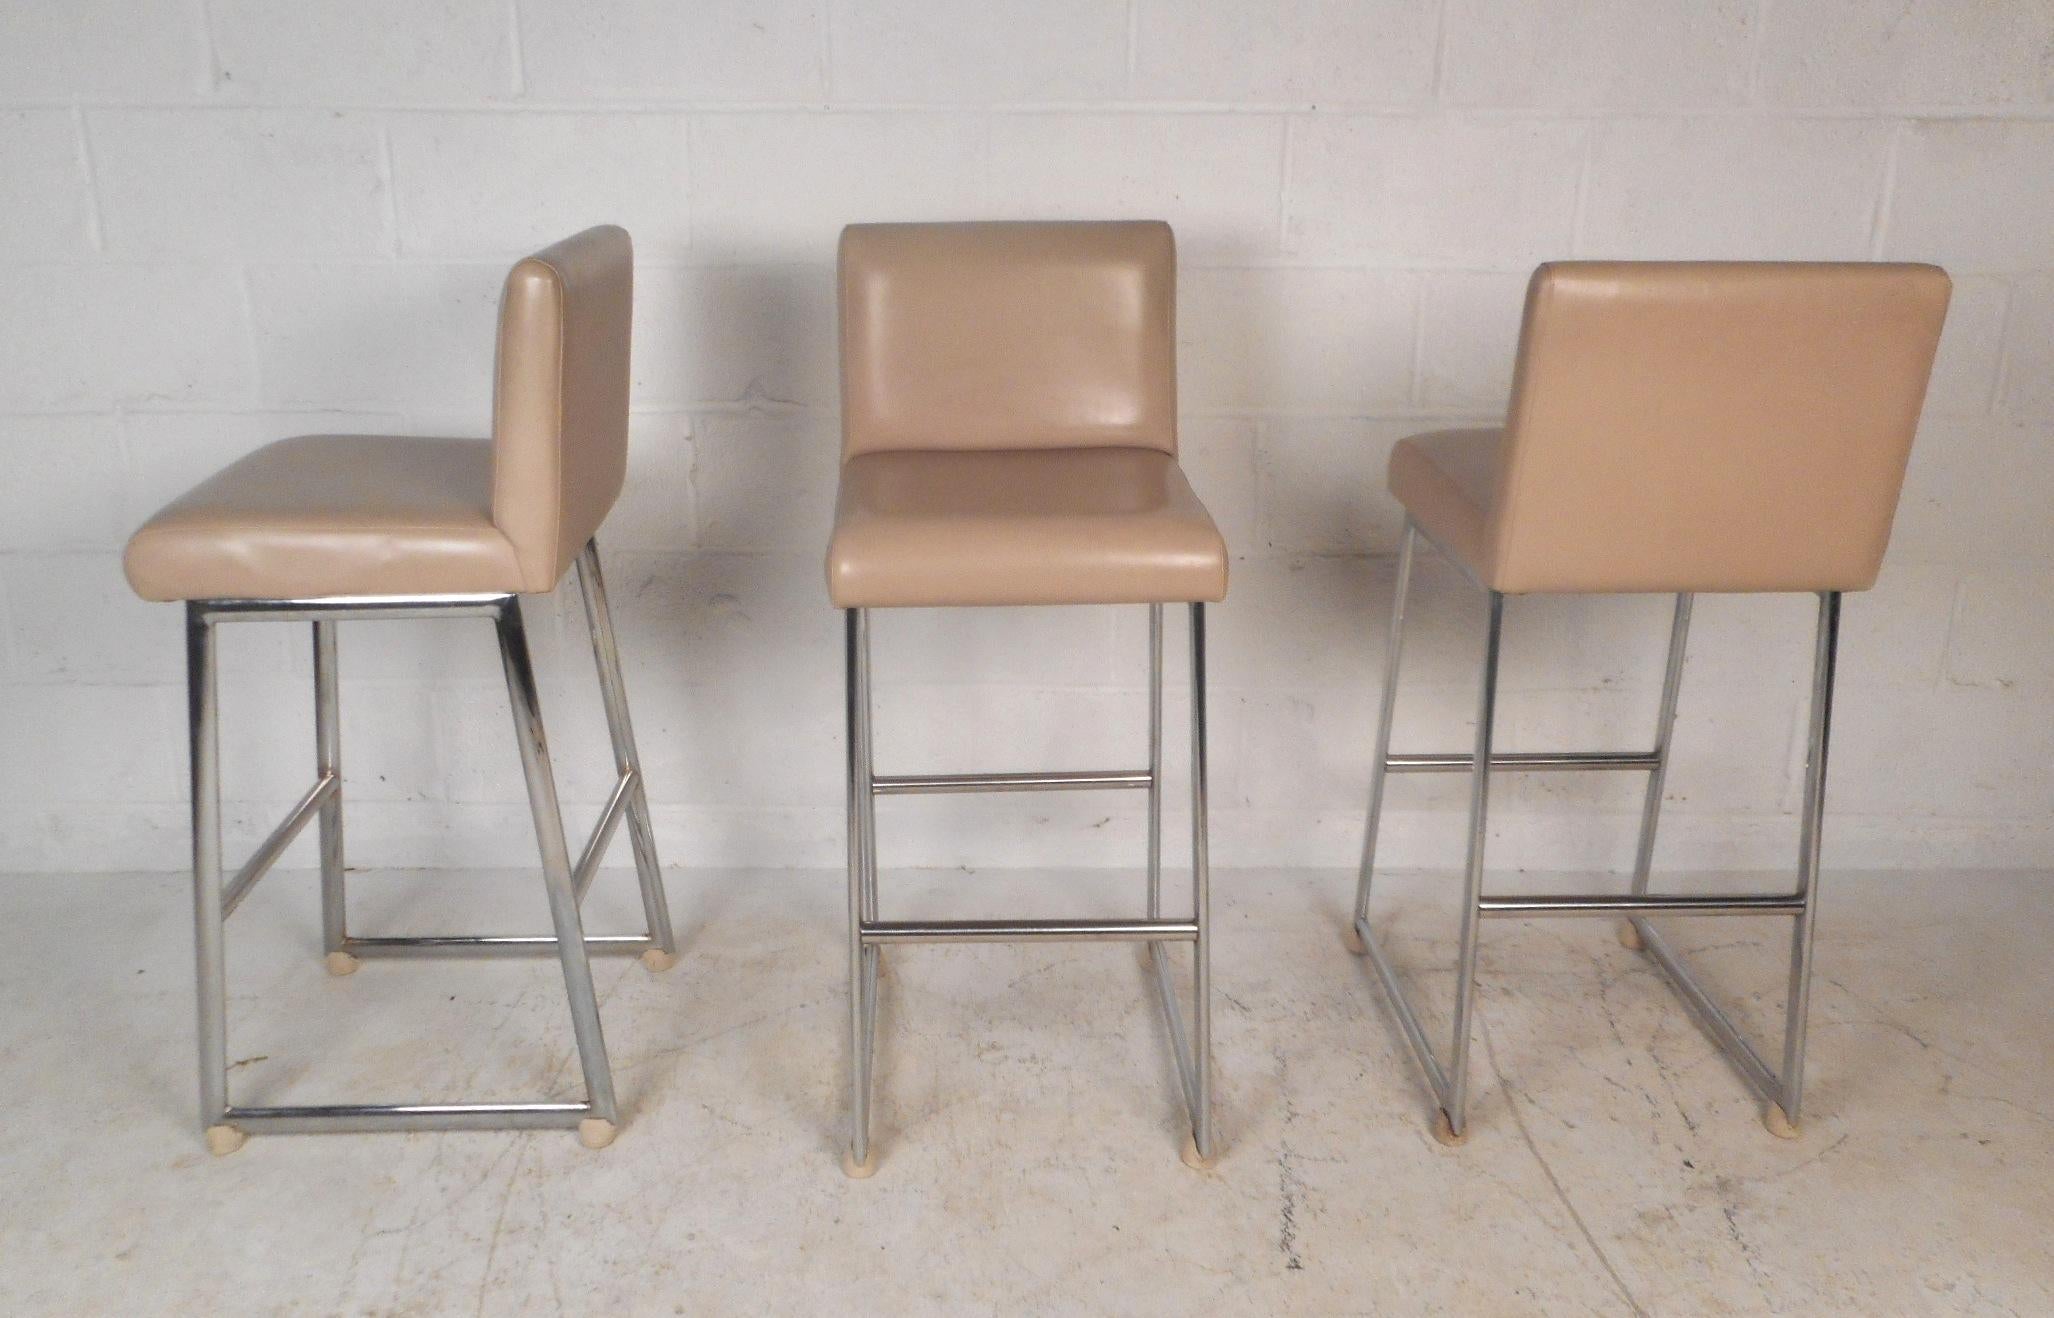 A stunning set of three vintage modern bar stools with chrome frames and thick padded seating covered in beige vinyl. The unique slipper design offers a comfortable and stylish place to sit. This beautiful mid-century set of bar stools make the